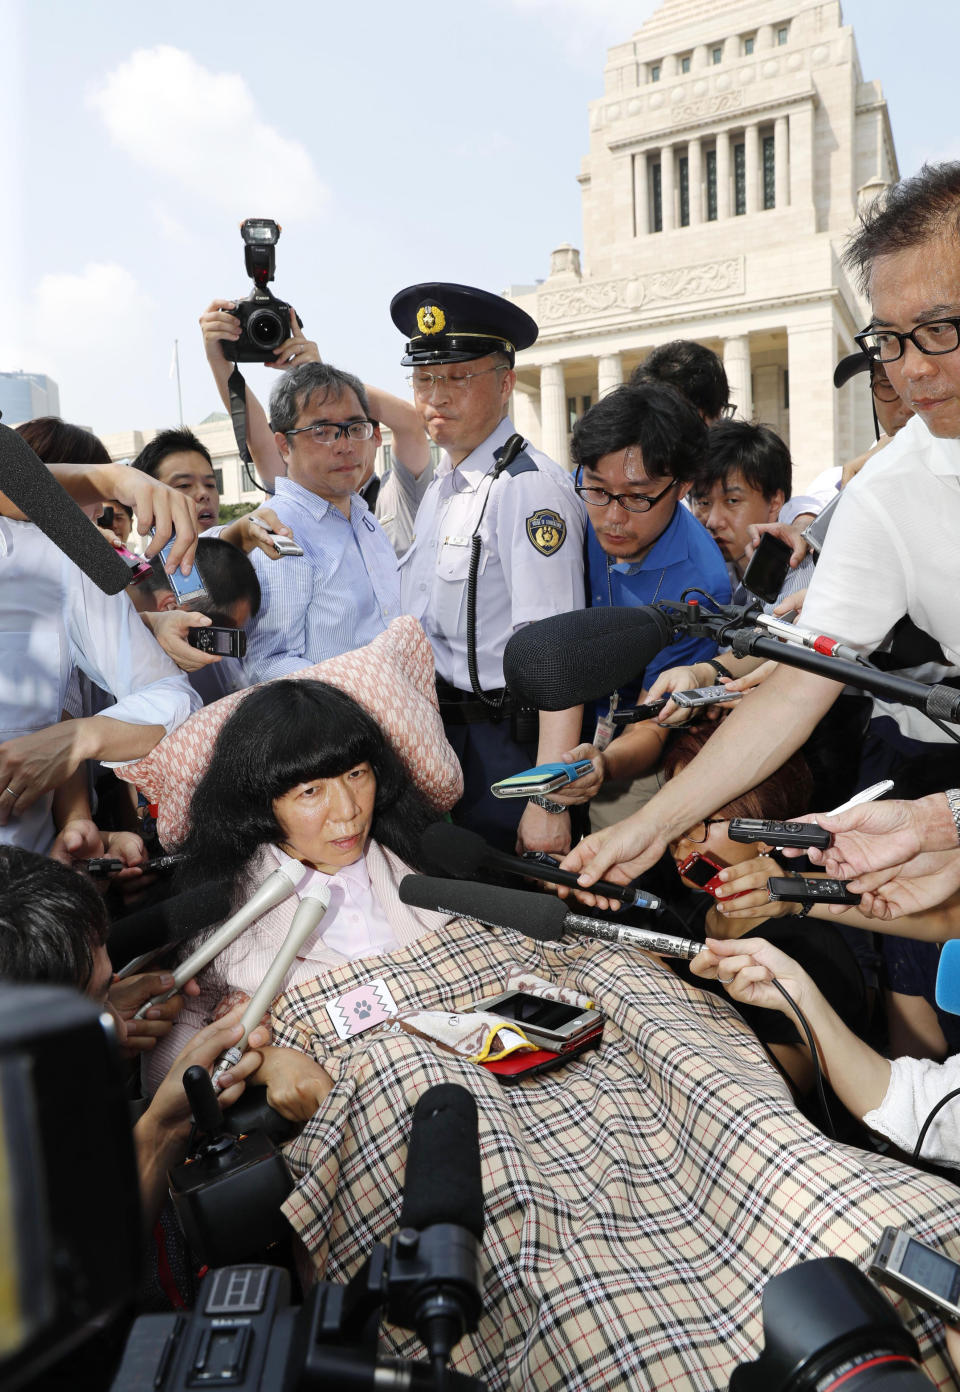 Newly-elected lawmaker Eiko Kimura in a wheelchair is surrounded by journalists as she arrives at the parliament building, background, to attend an extraordinary session of the upper house in Tokyo Thursday, Aug. 1, 2019. Japan’s parliament convened after elections and a minor renovation at the upper house. Kimura, who has cerebral palsy, won the July 21 elections, representing an opposition group. (Yohei Funai/Kyodo News via AP)